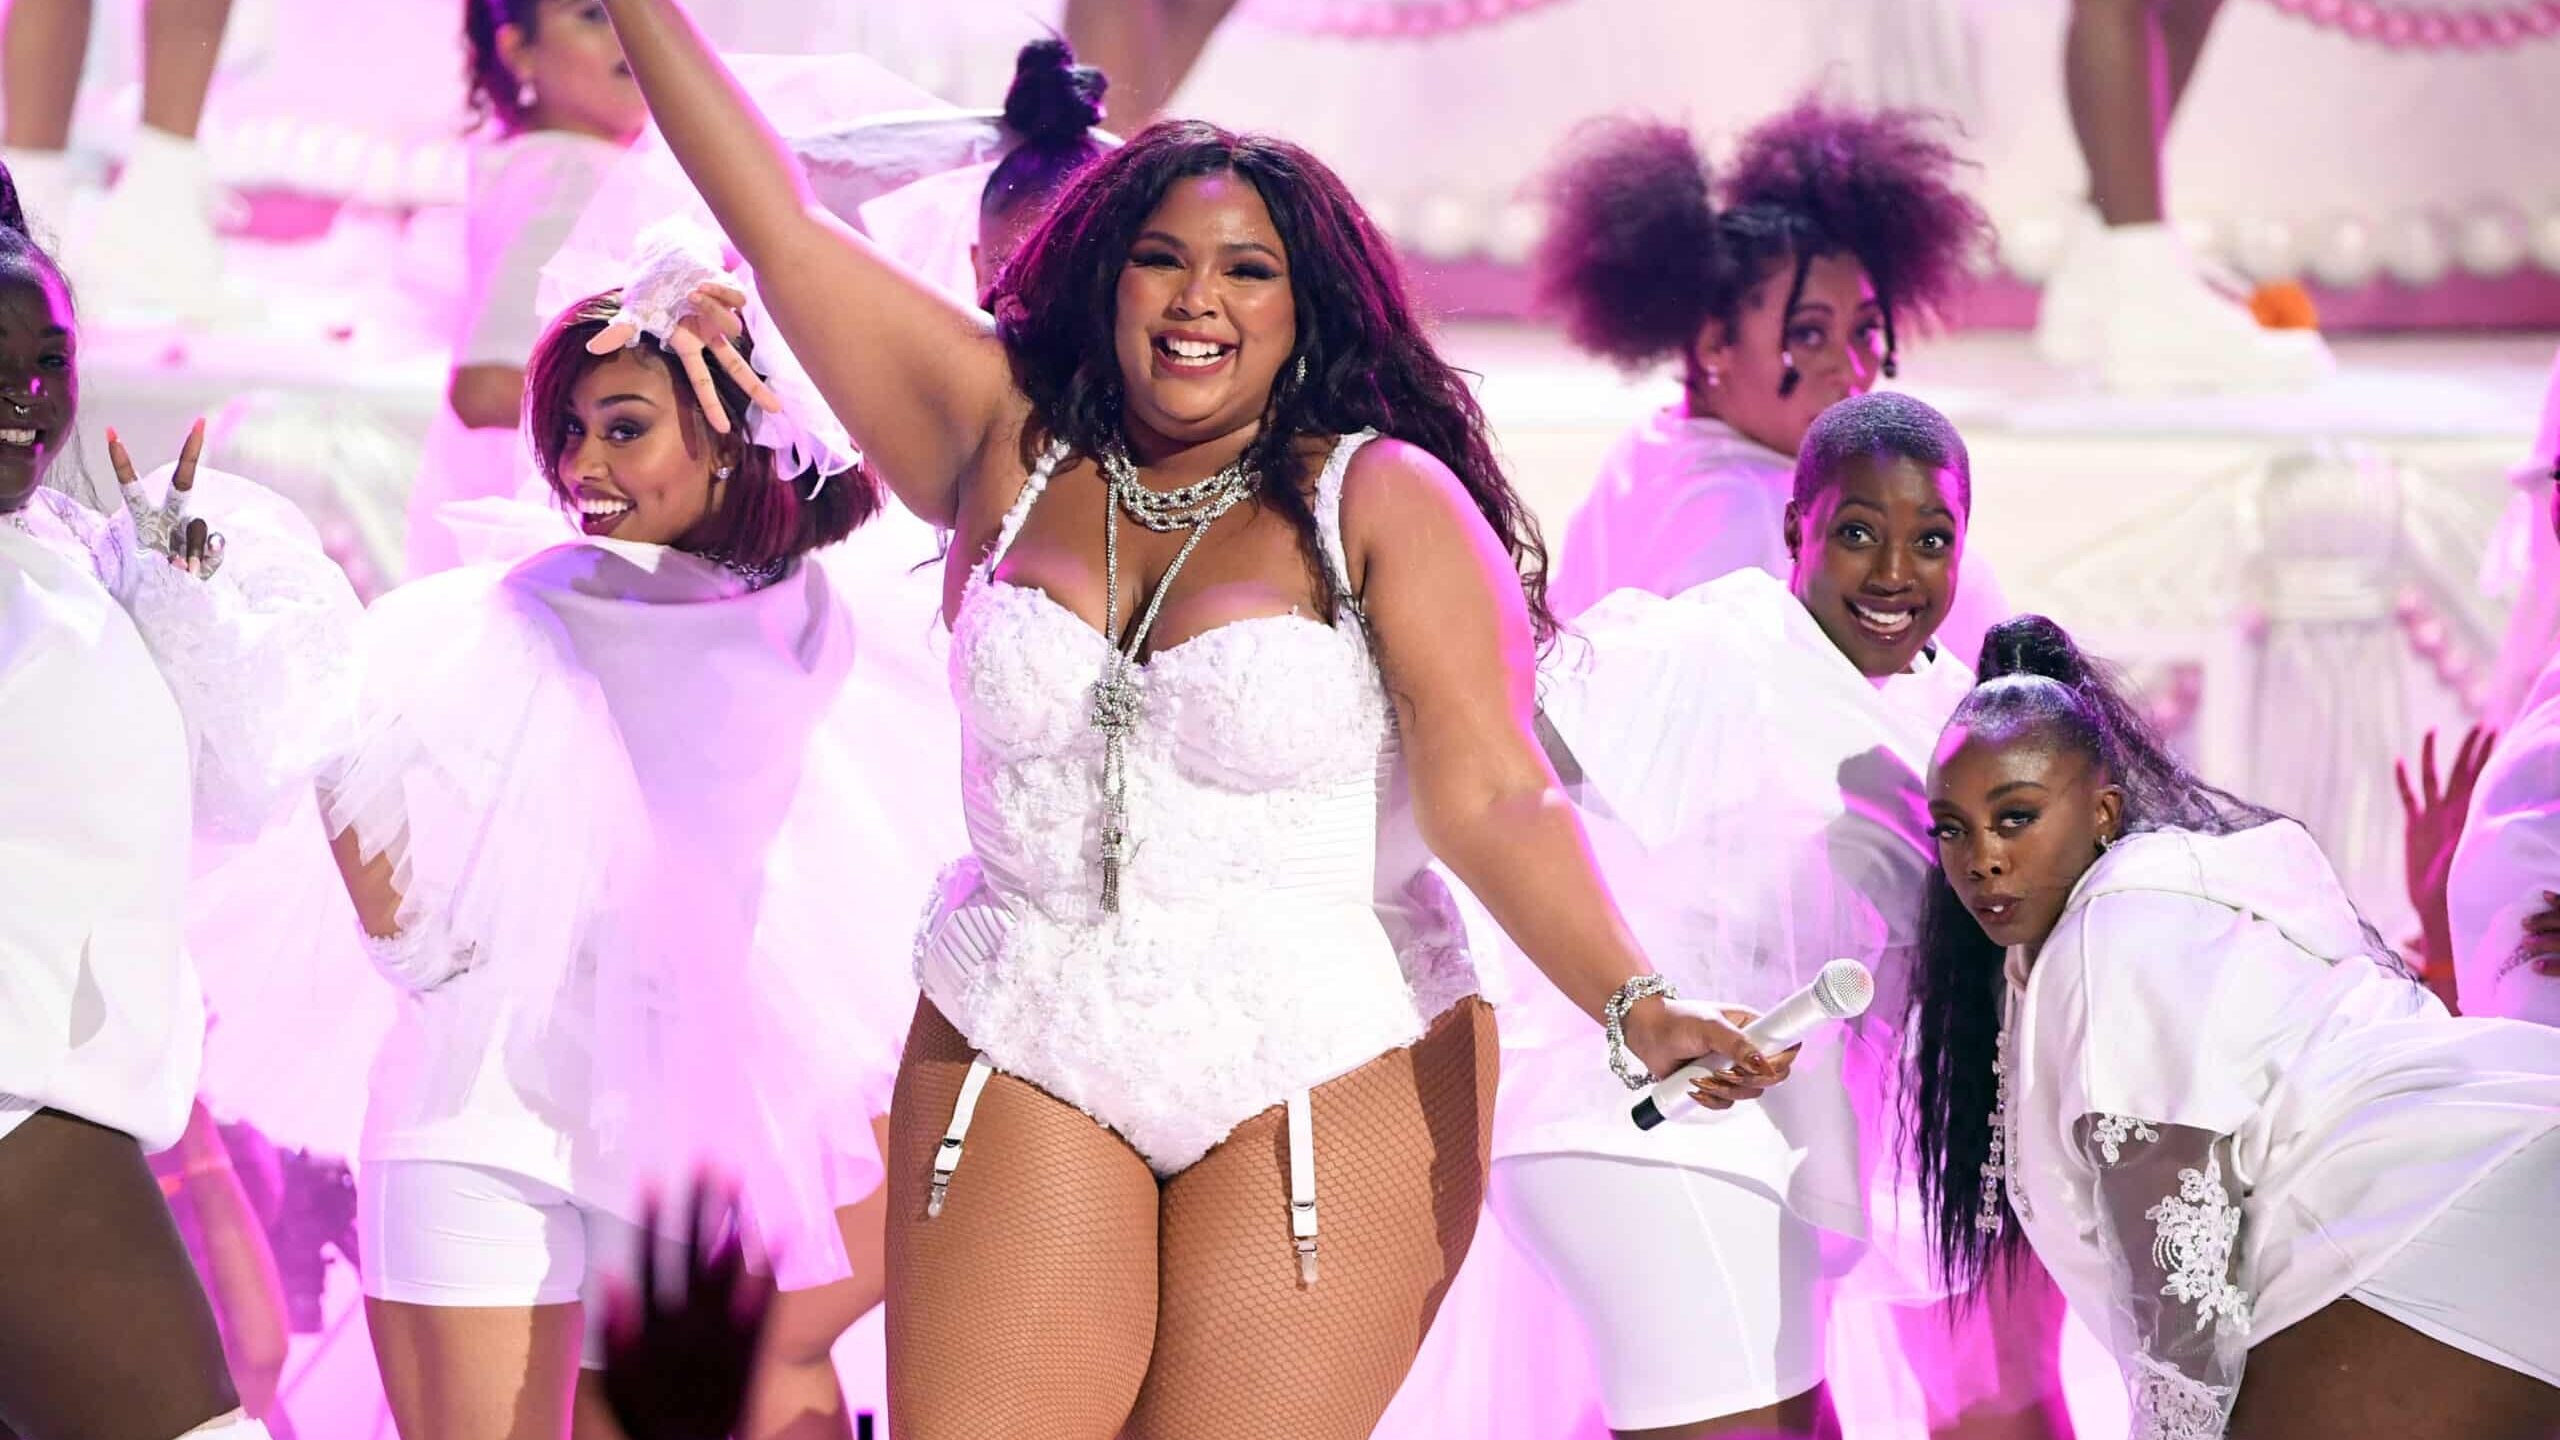 LOS ANGELES, CALIFORNIA - JUNE 23: Lizzo performs onstage at the 2019 BET Awards on June 23, 2019 in Los Angeles, California.